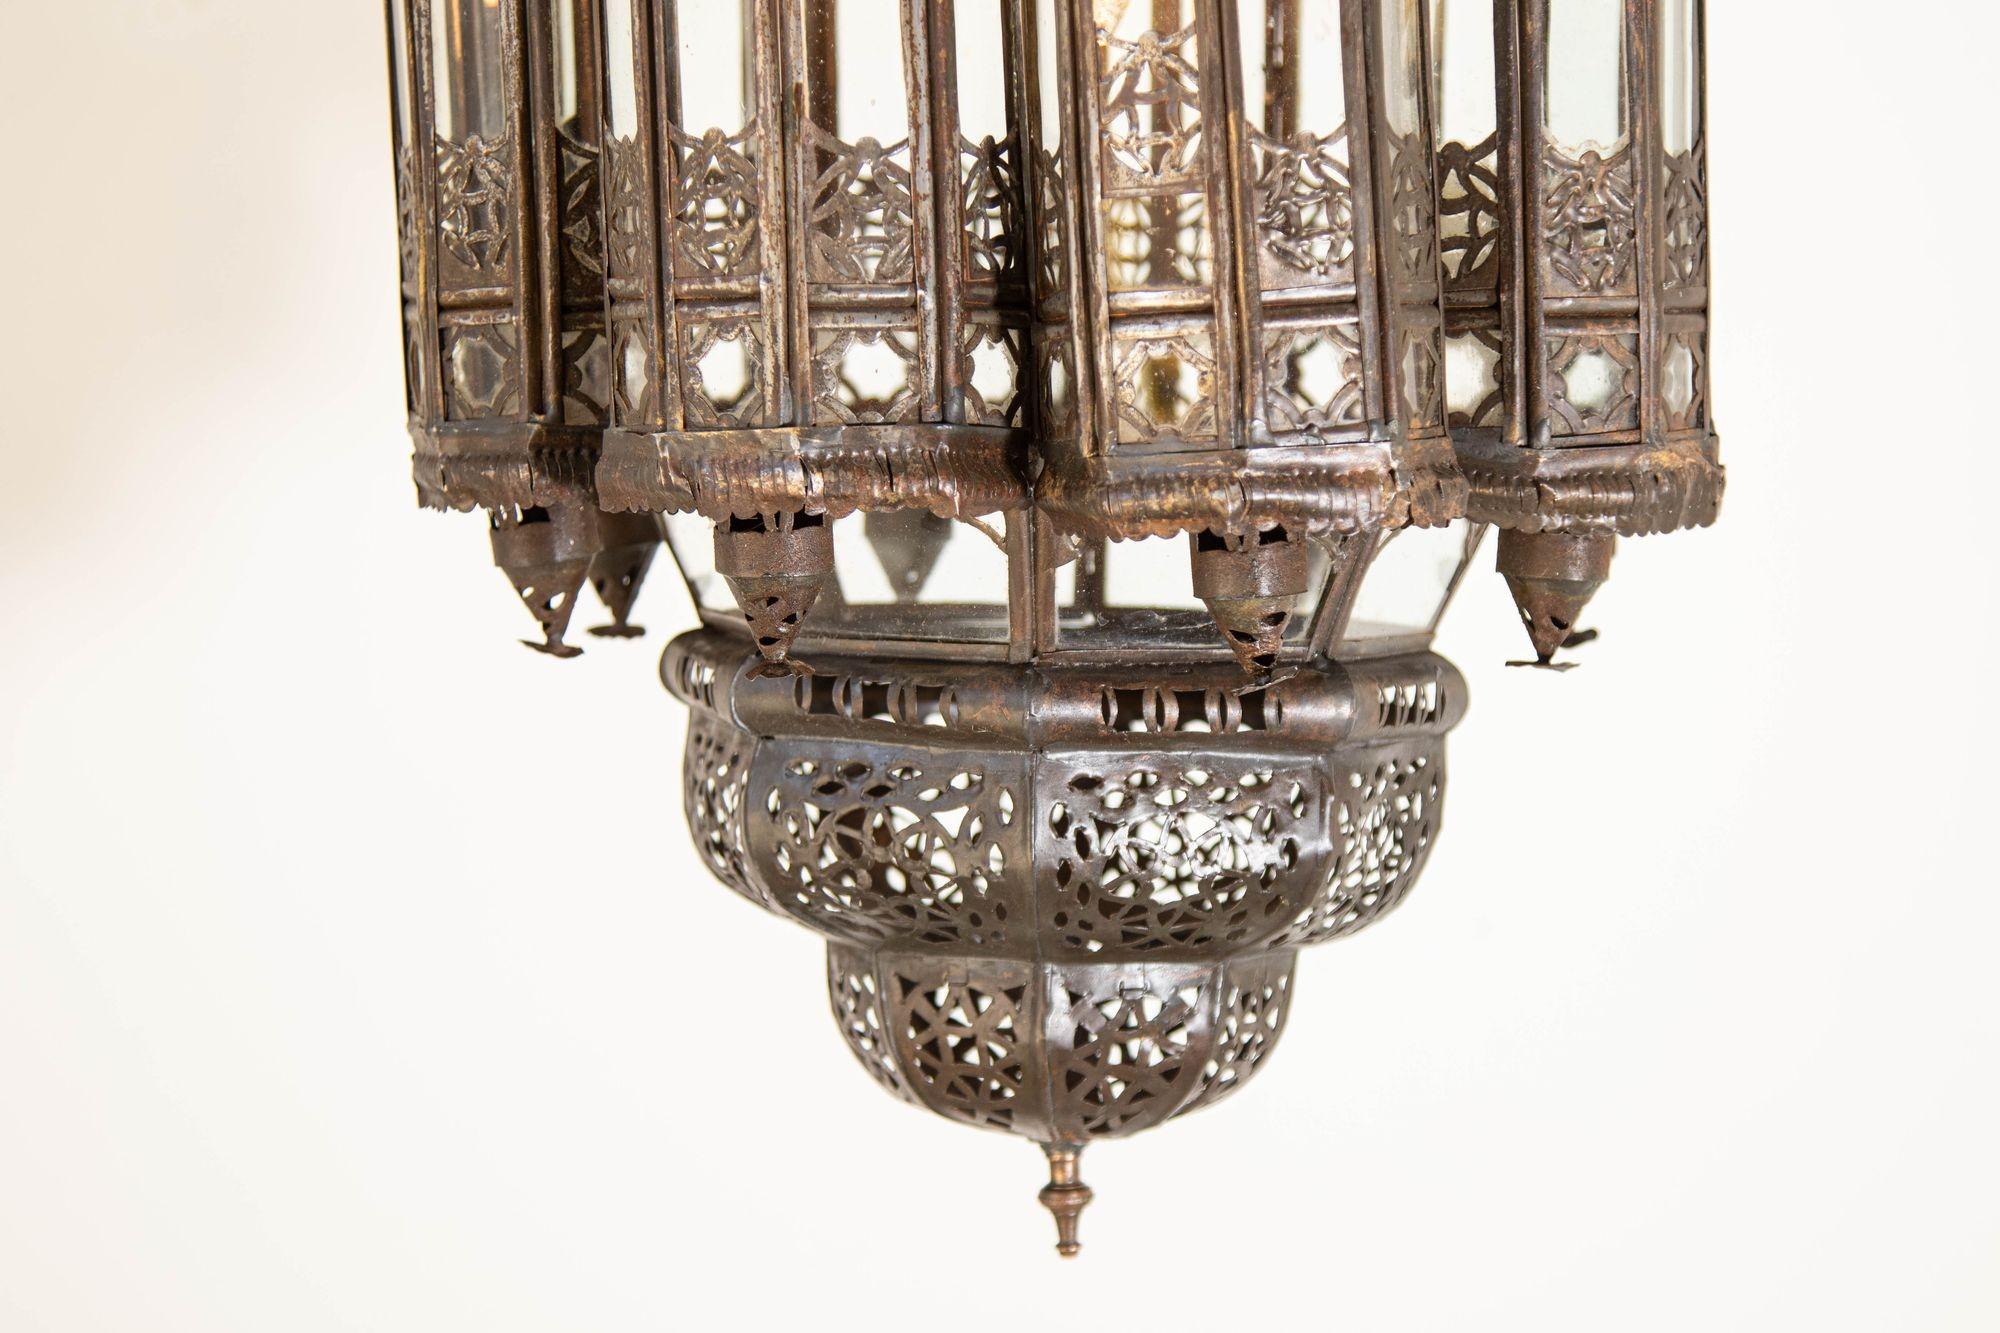 Metal Vintage Moroccan Lantern Mamounia Clear Glass Hand-Crafted Ceiling Light Fixture For Sale